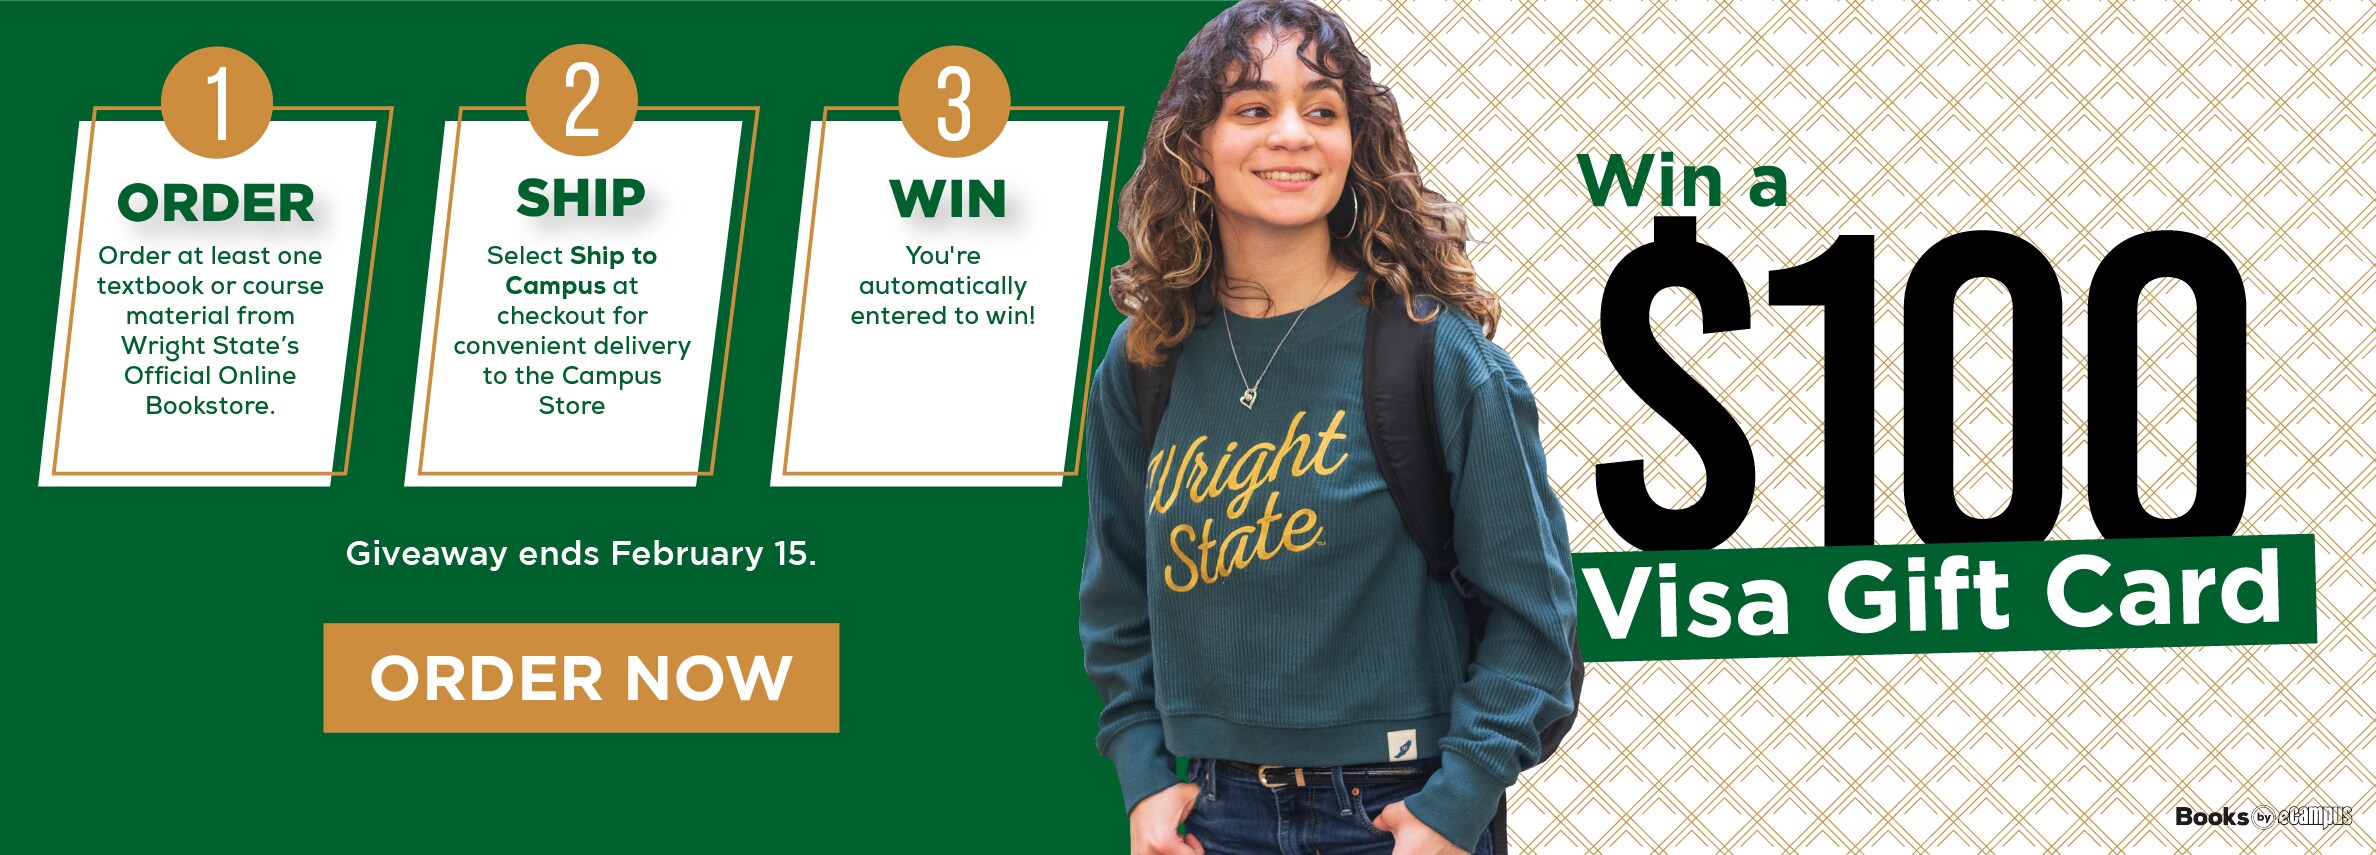 Win a $100 Visa Gift Card. ORDER Order at least one textbook or course material from Wright State's Official Online Bookstore. SHIP Select Ship to Campus at checkout for convenient delivery to the Campus Store Giveaway ends February 15. ORDER NOW 3 WIN You're automatically entered to win!